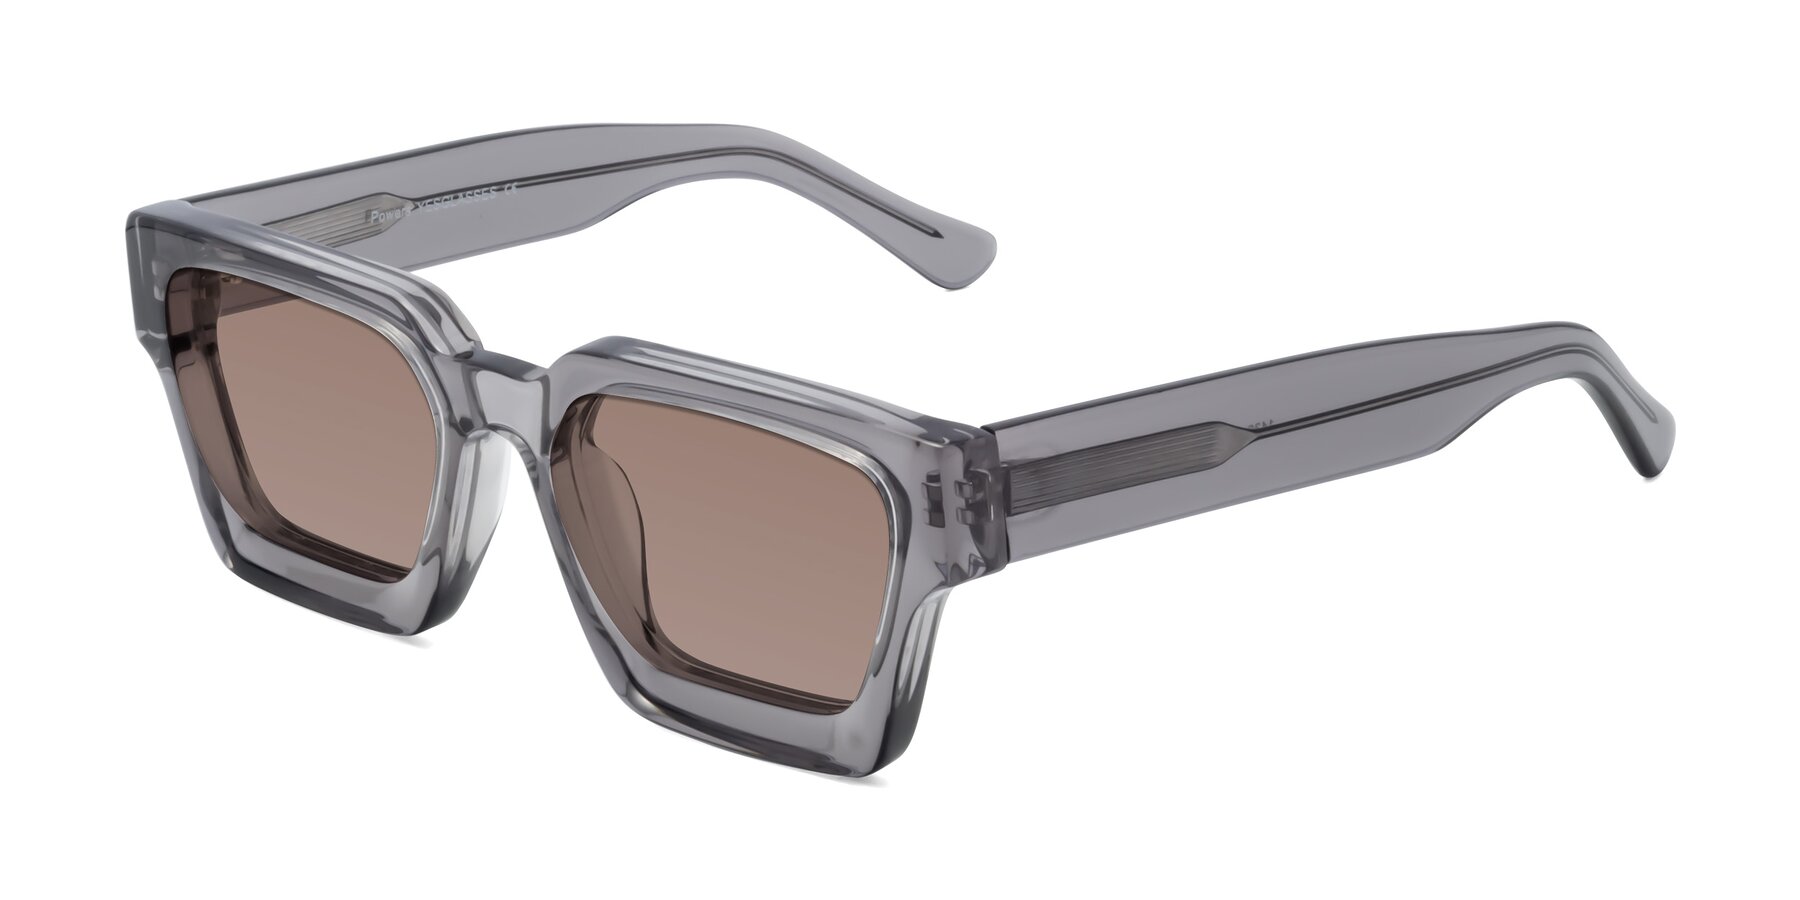 Angle of Powers in Translucent Gray with Medium Brown Tinted Lenses